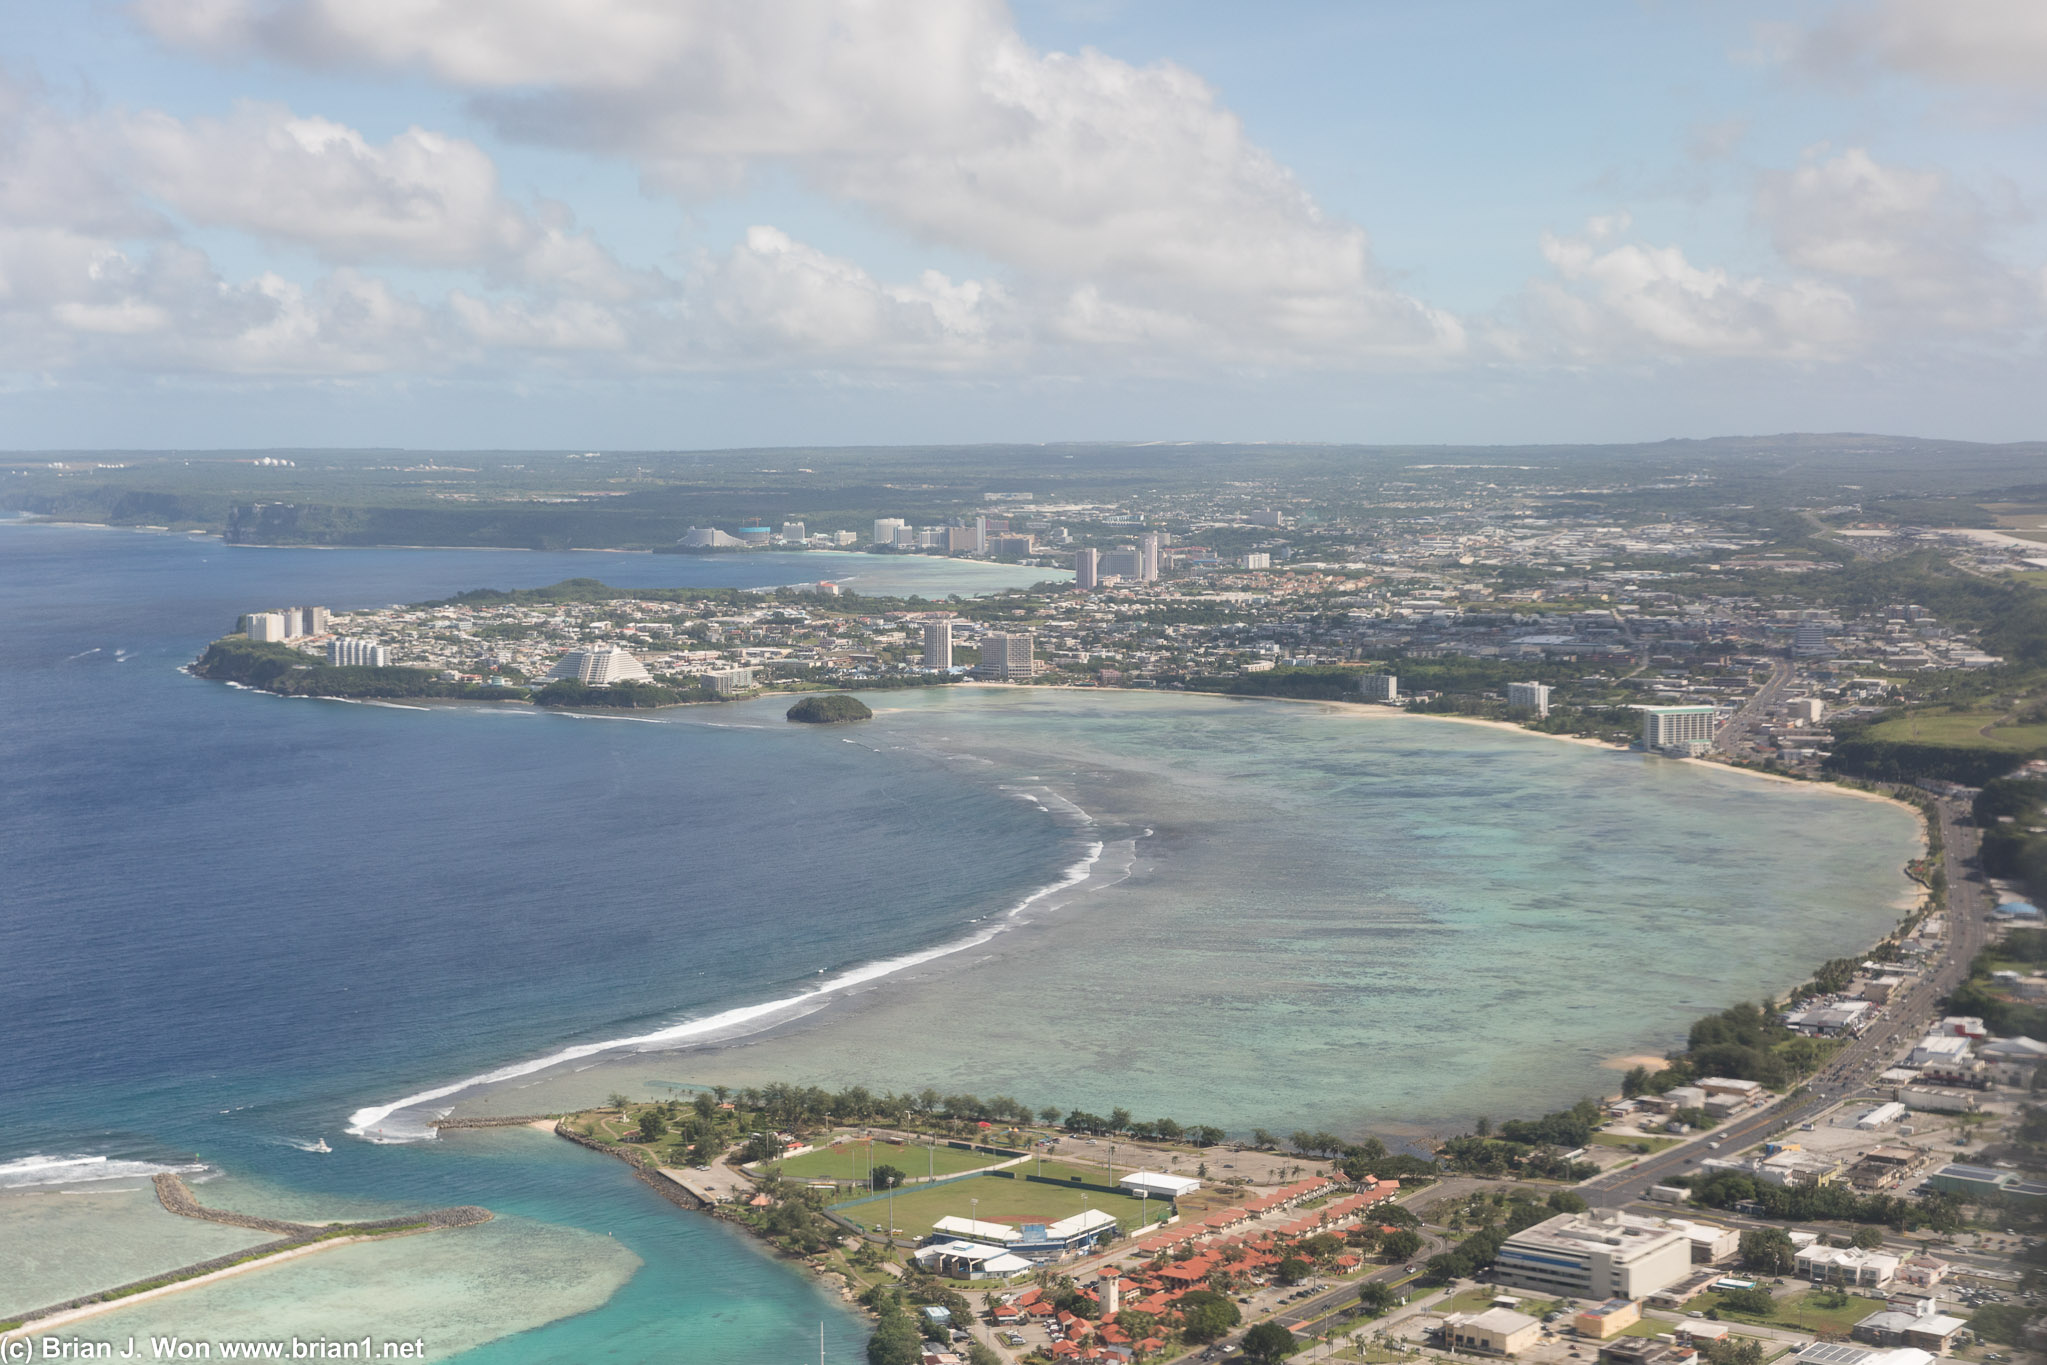 Final approach over Guam. Hagatna in the foreground.